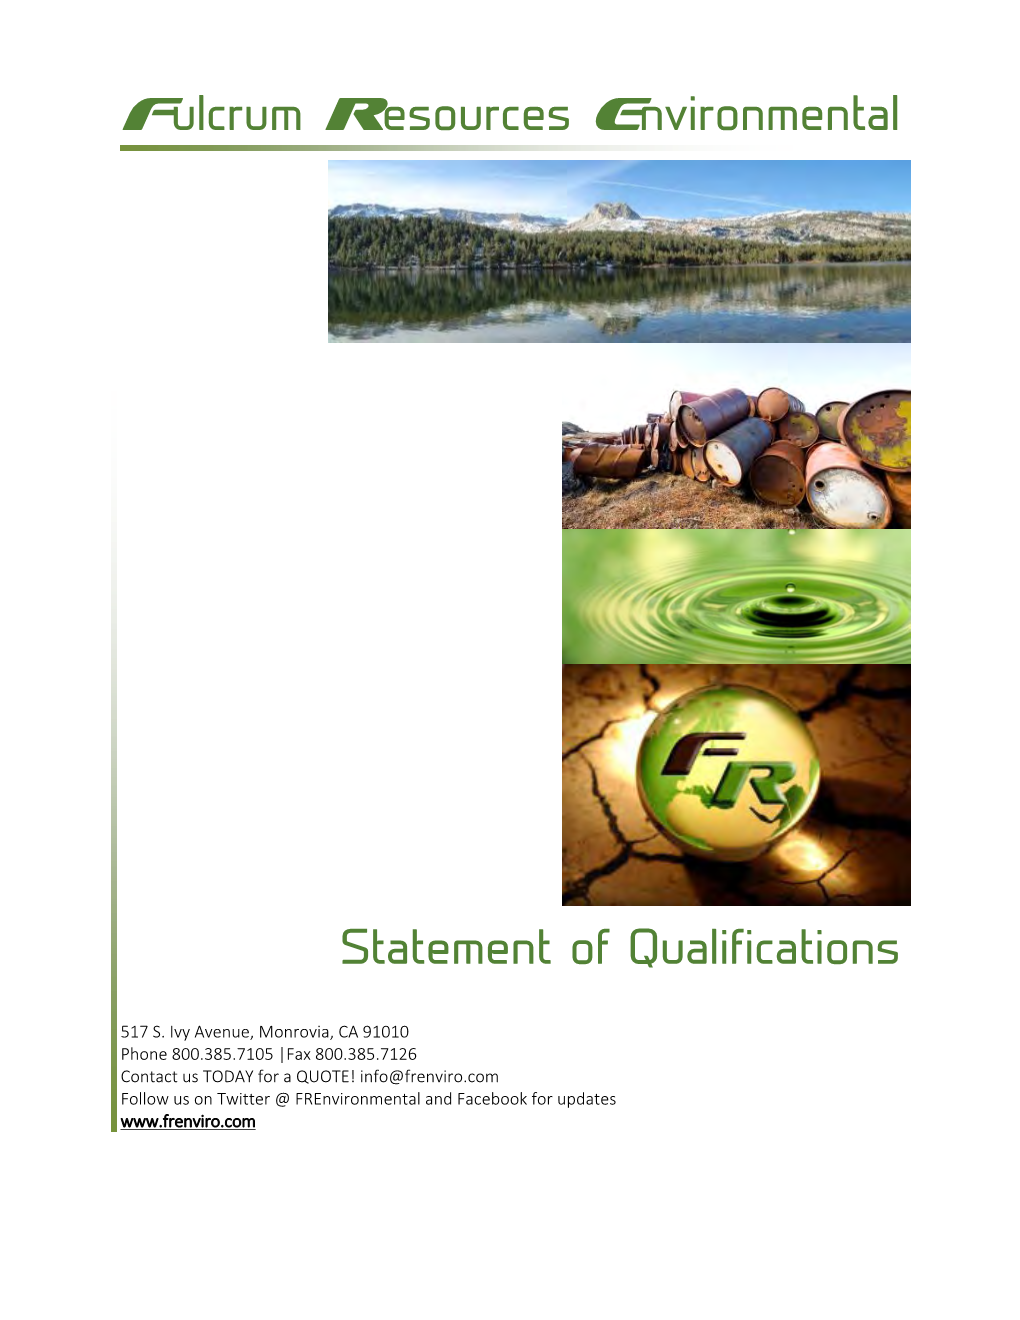 Fulcrum Resources Environmental Statement of Qualifications